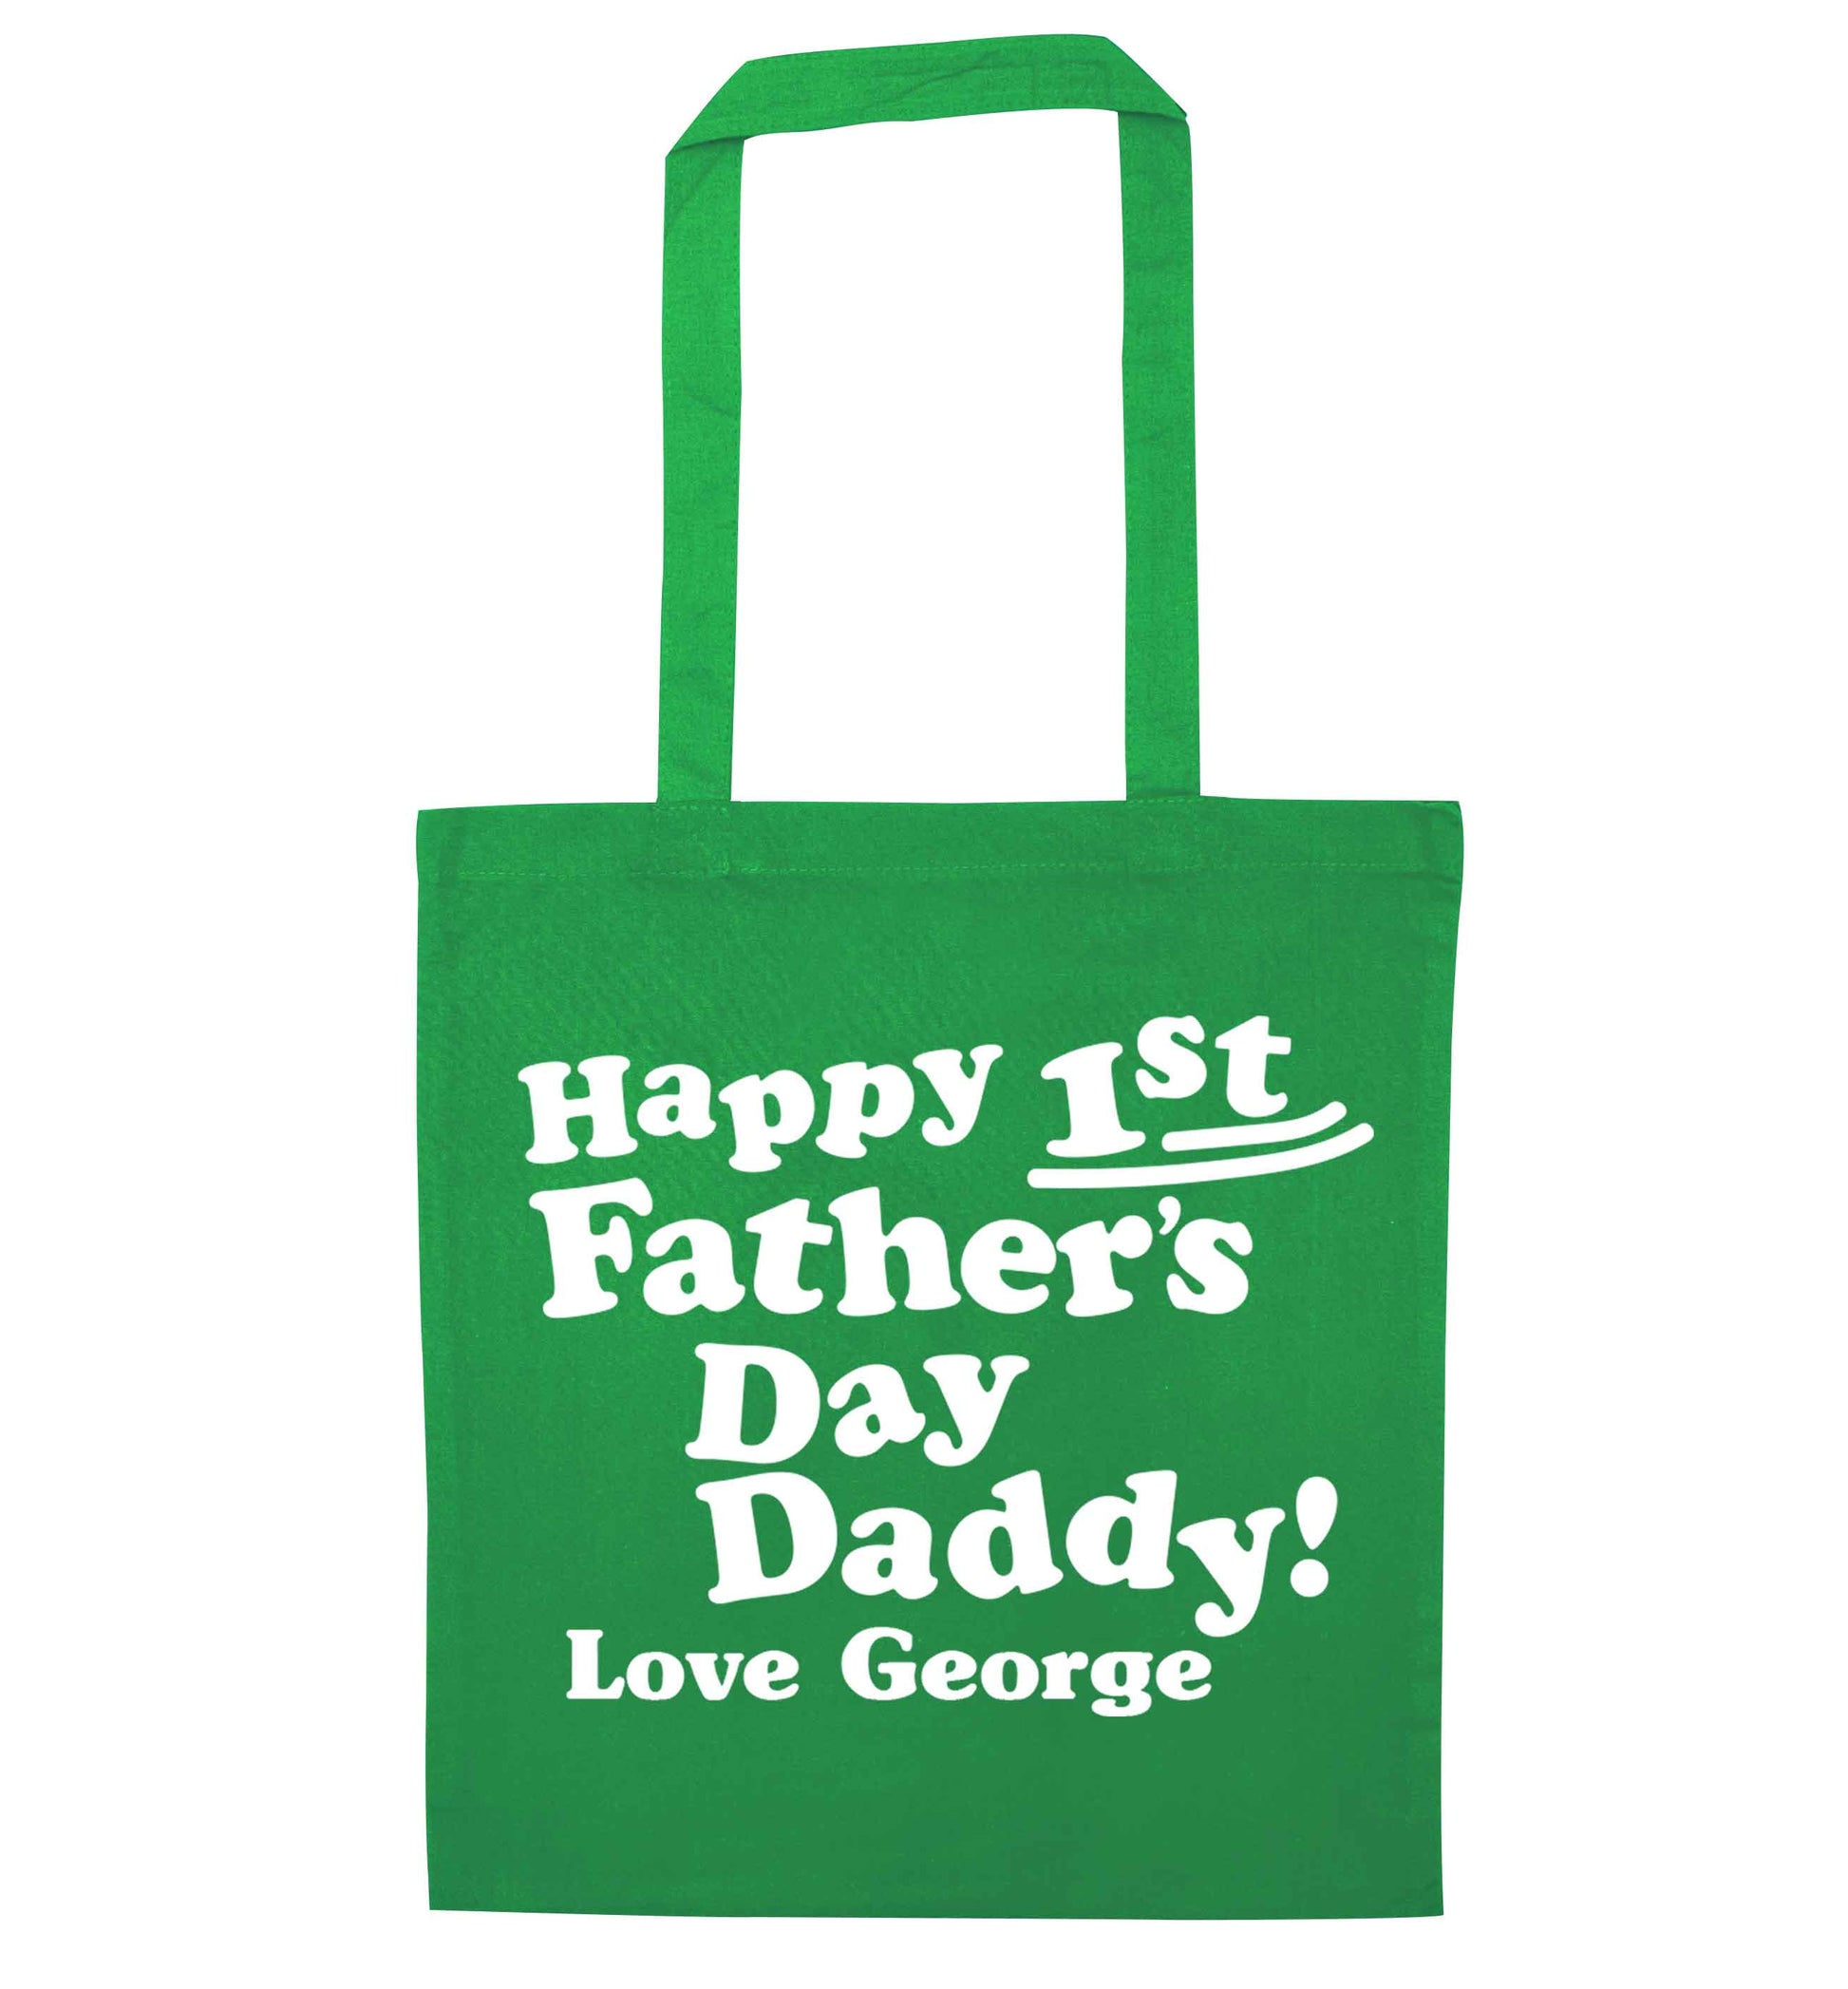 Happy first Fathers Day daddy love personalised green tote bag